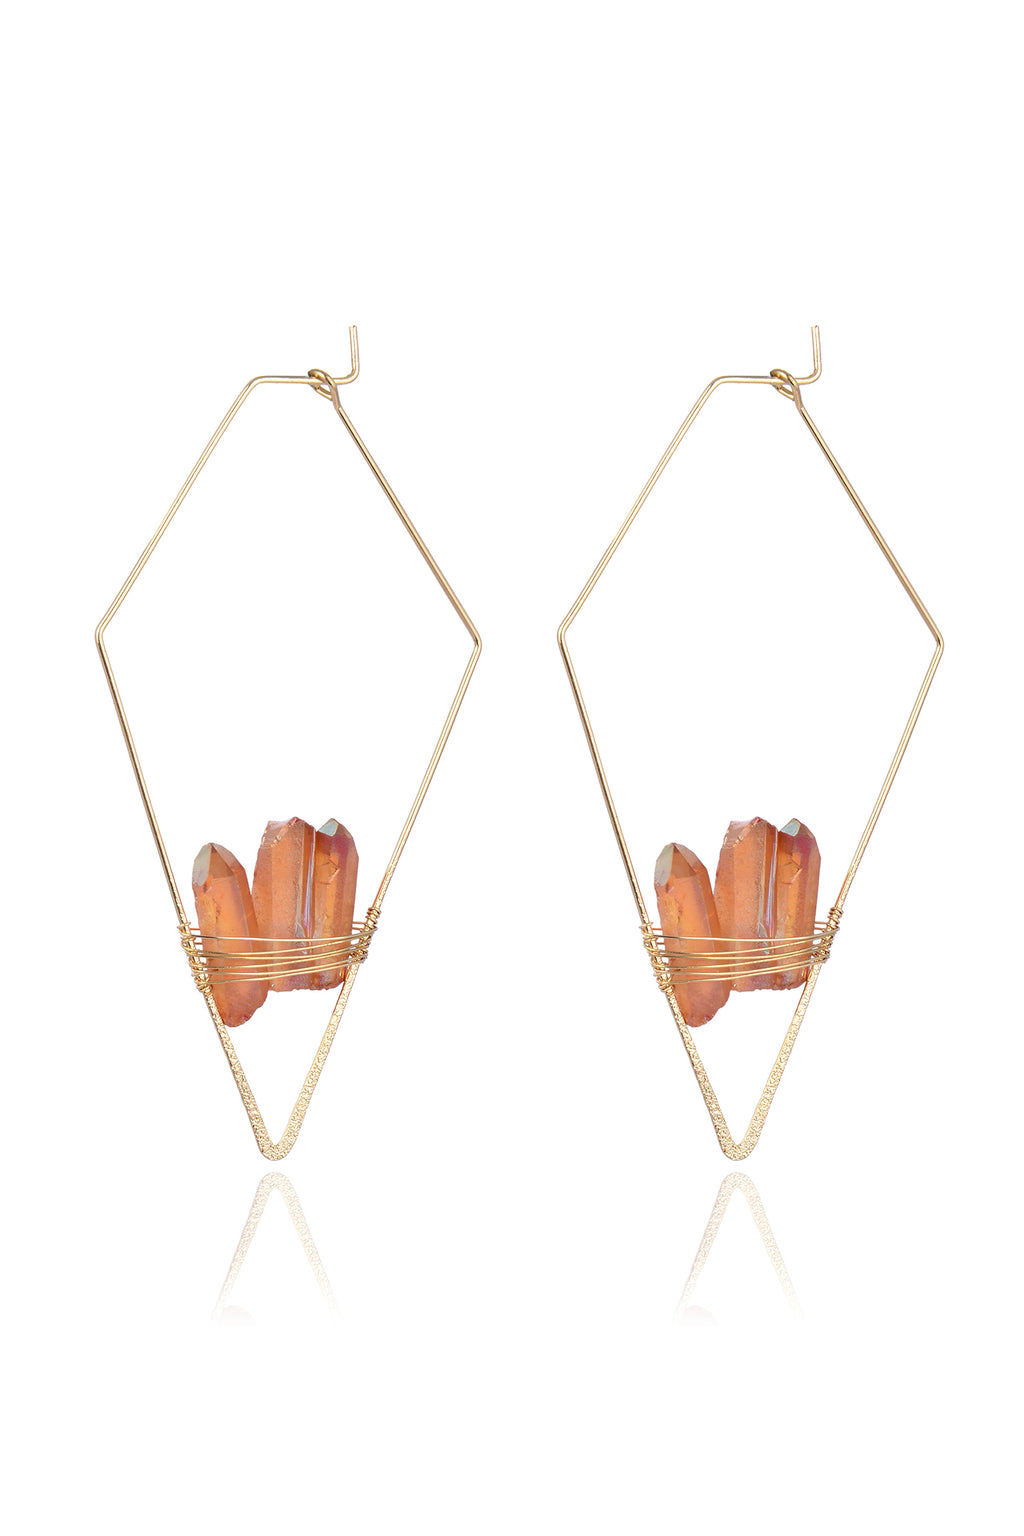 Gold tone brass kite earrings with blush colored quartz stones.